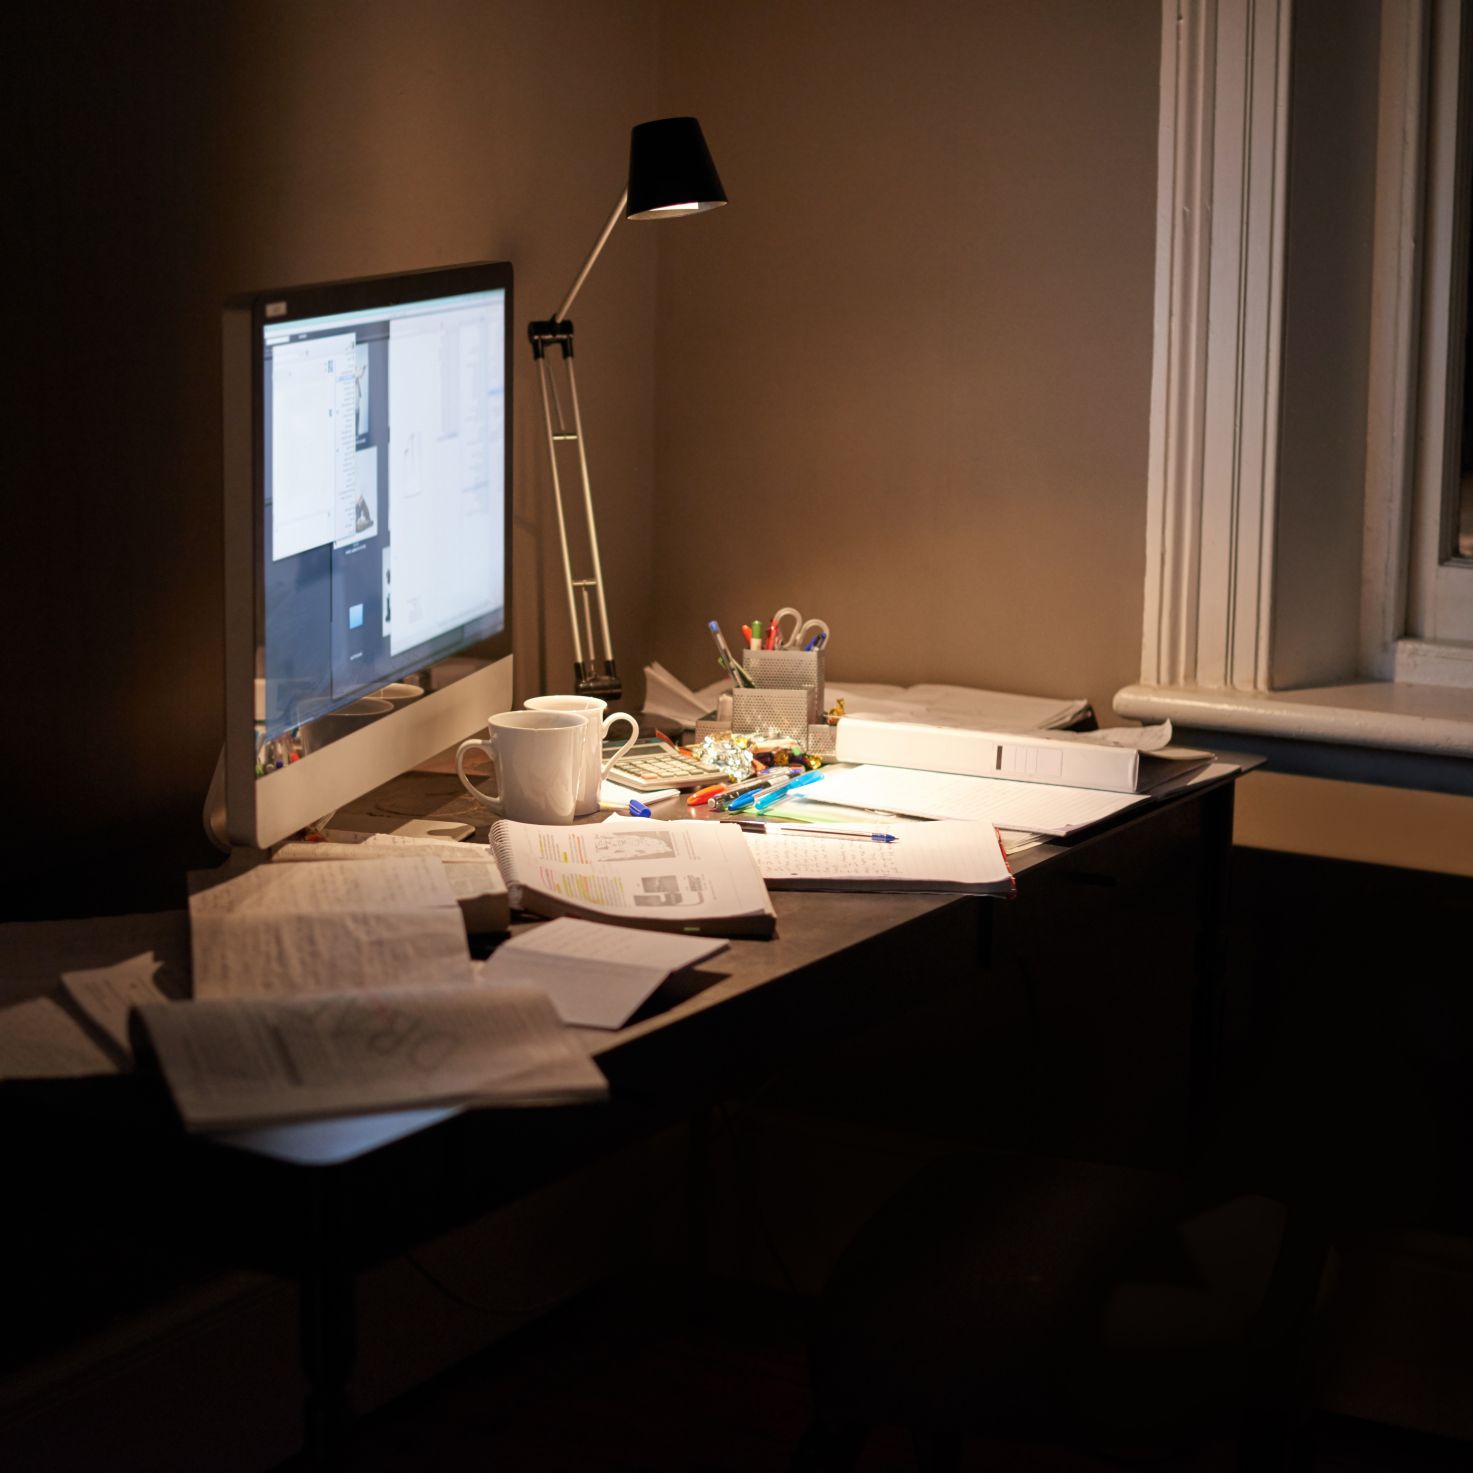 Scattered papers and textbooks on a desk with computer screen and lamp.